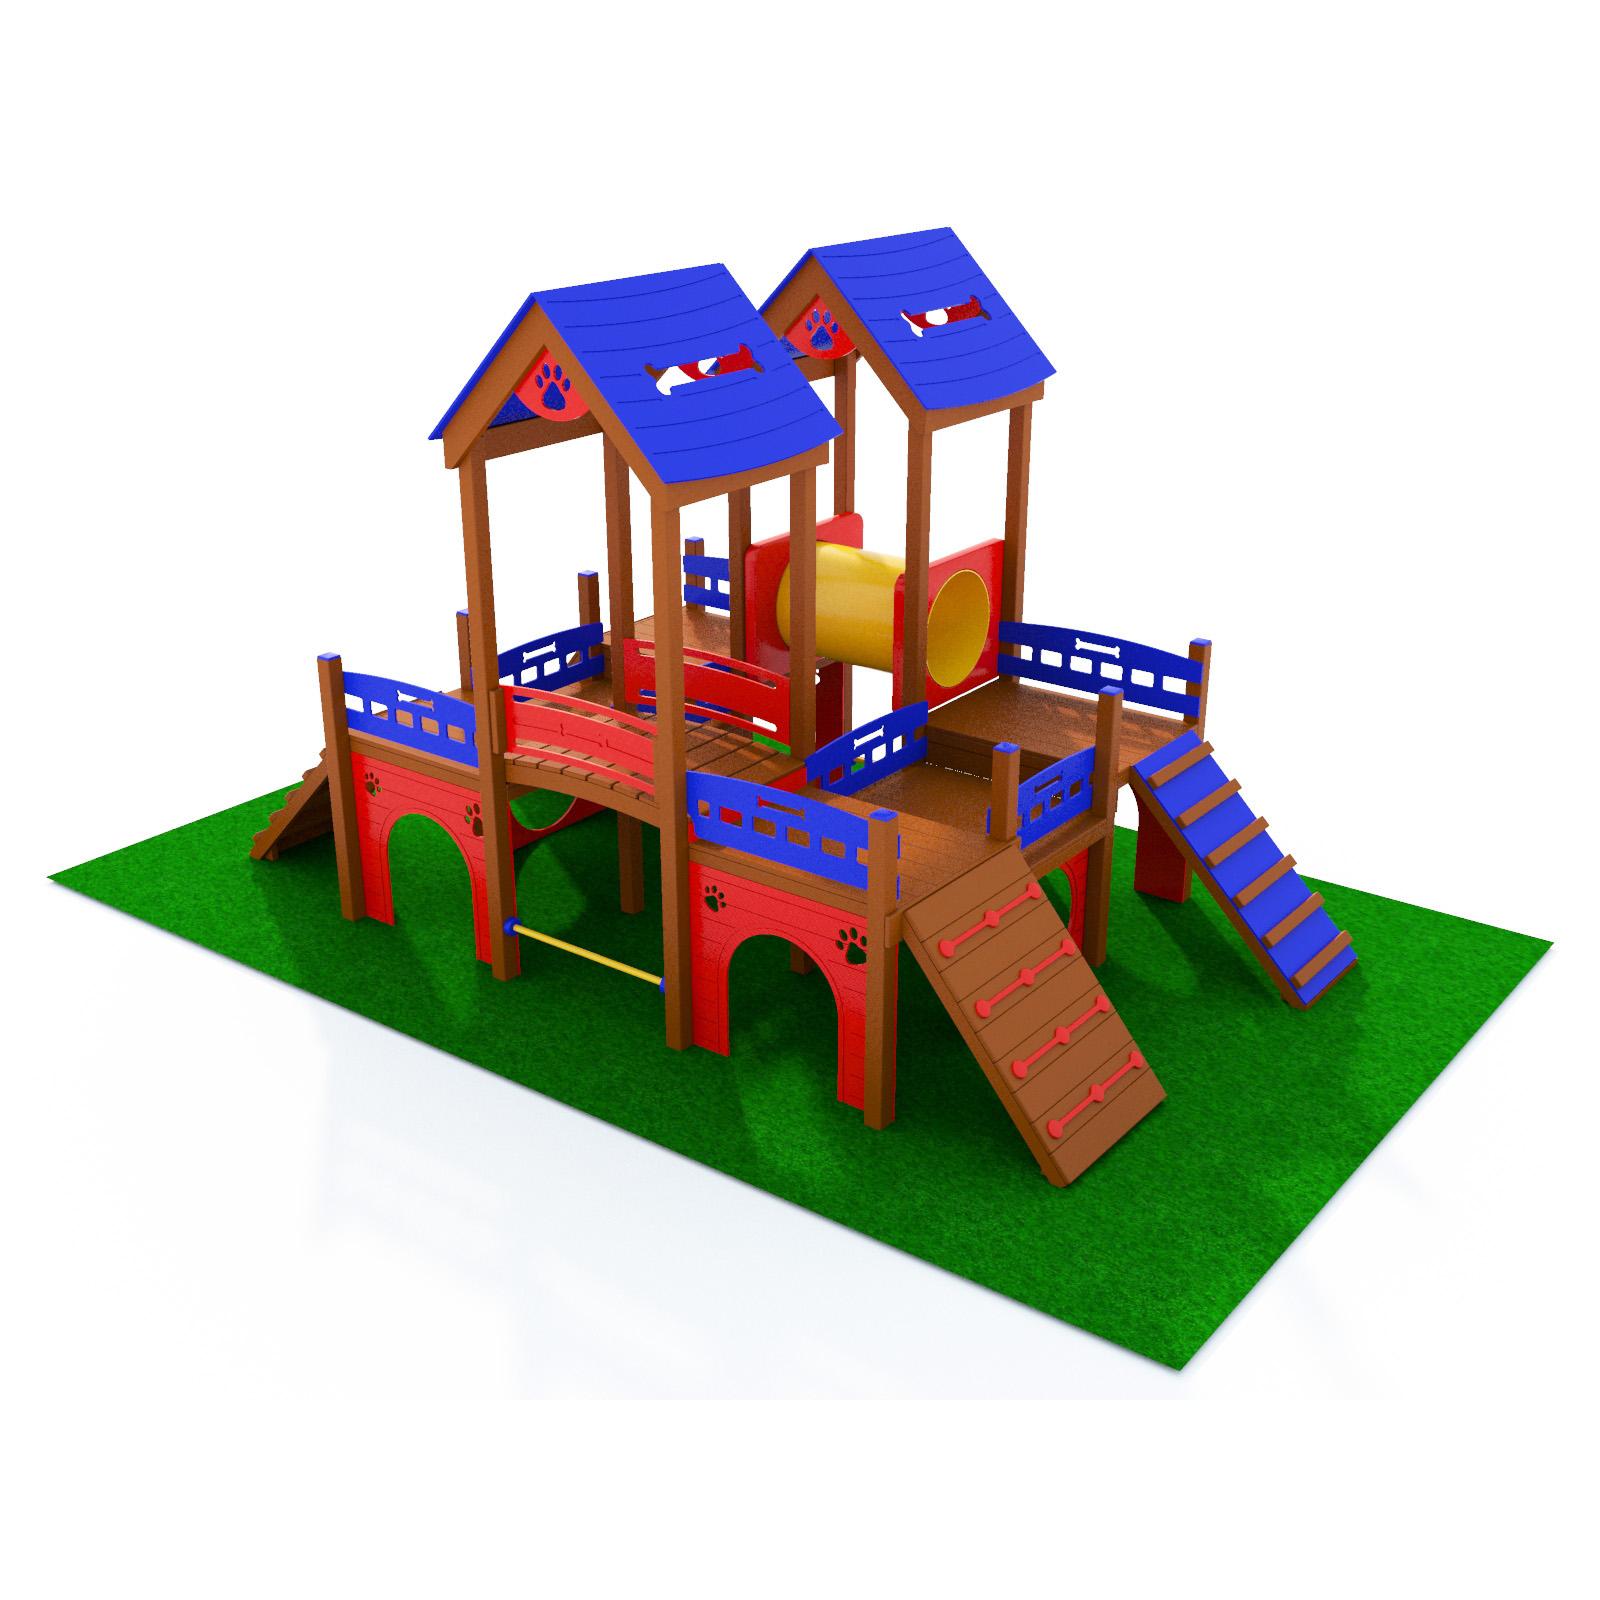 Outdoor Playset For Dogs Off 50, Outdoor Playground Equipment For Dogs